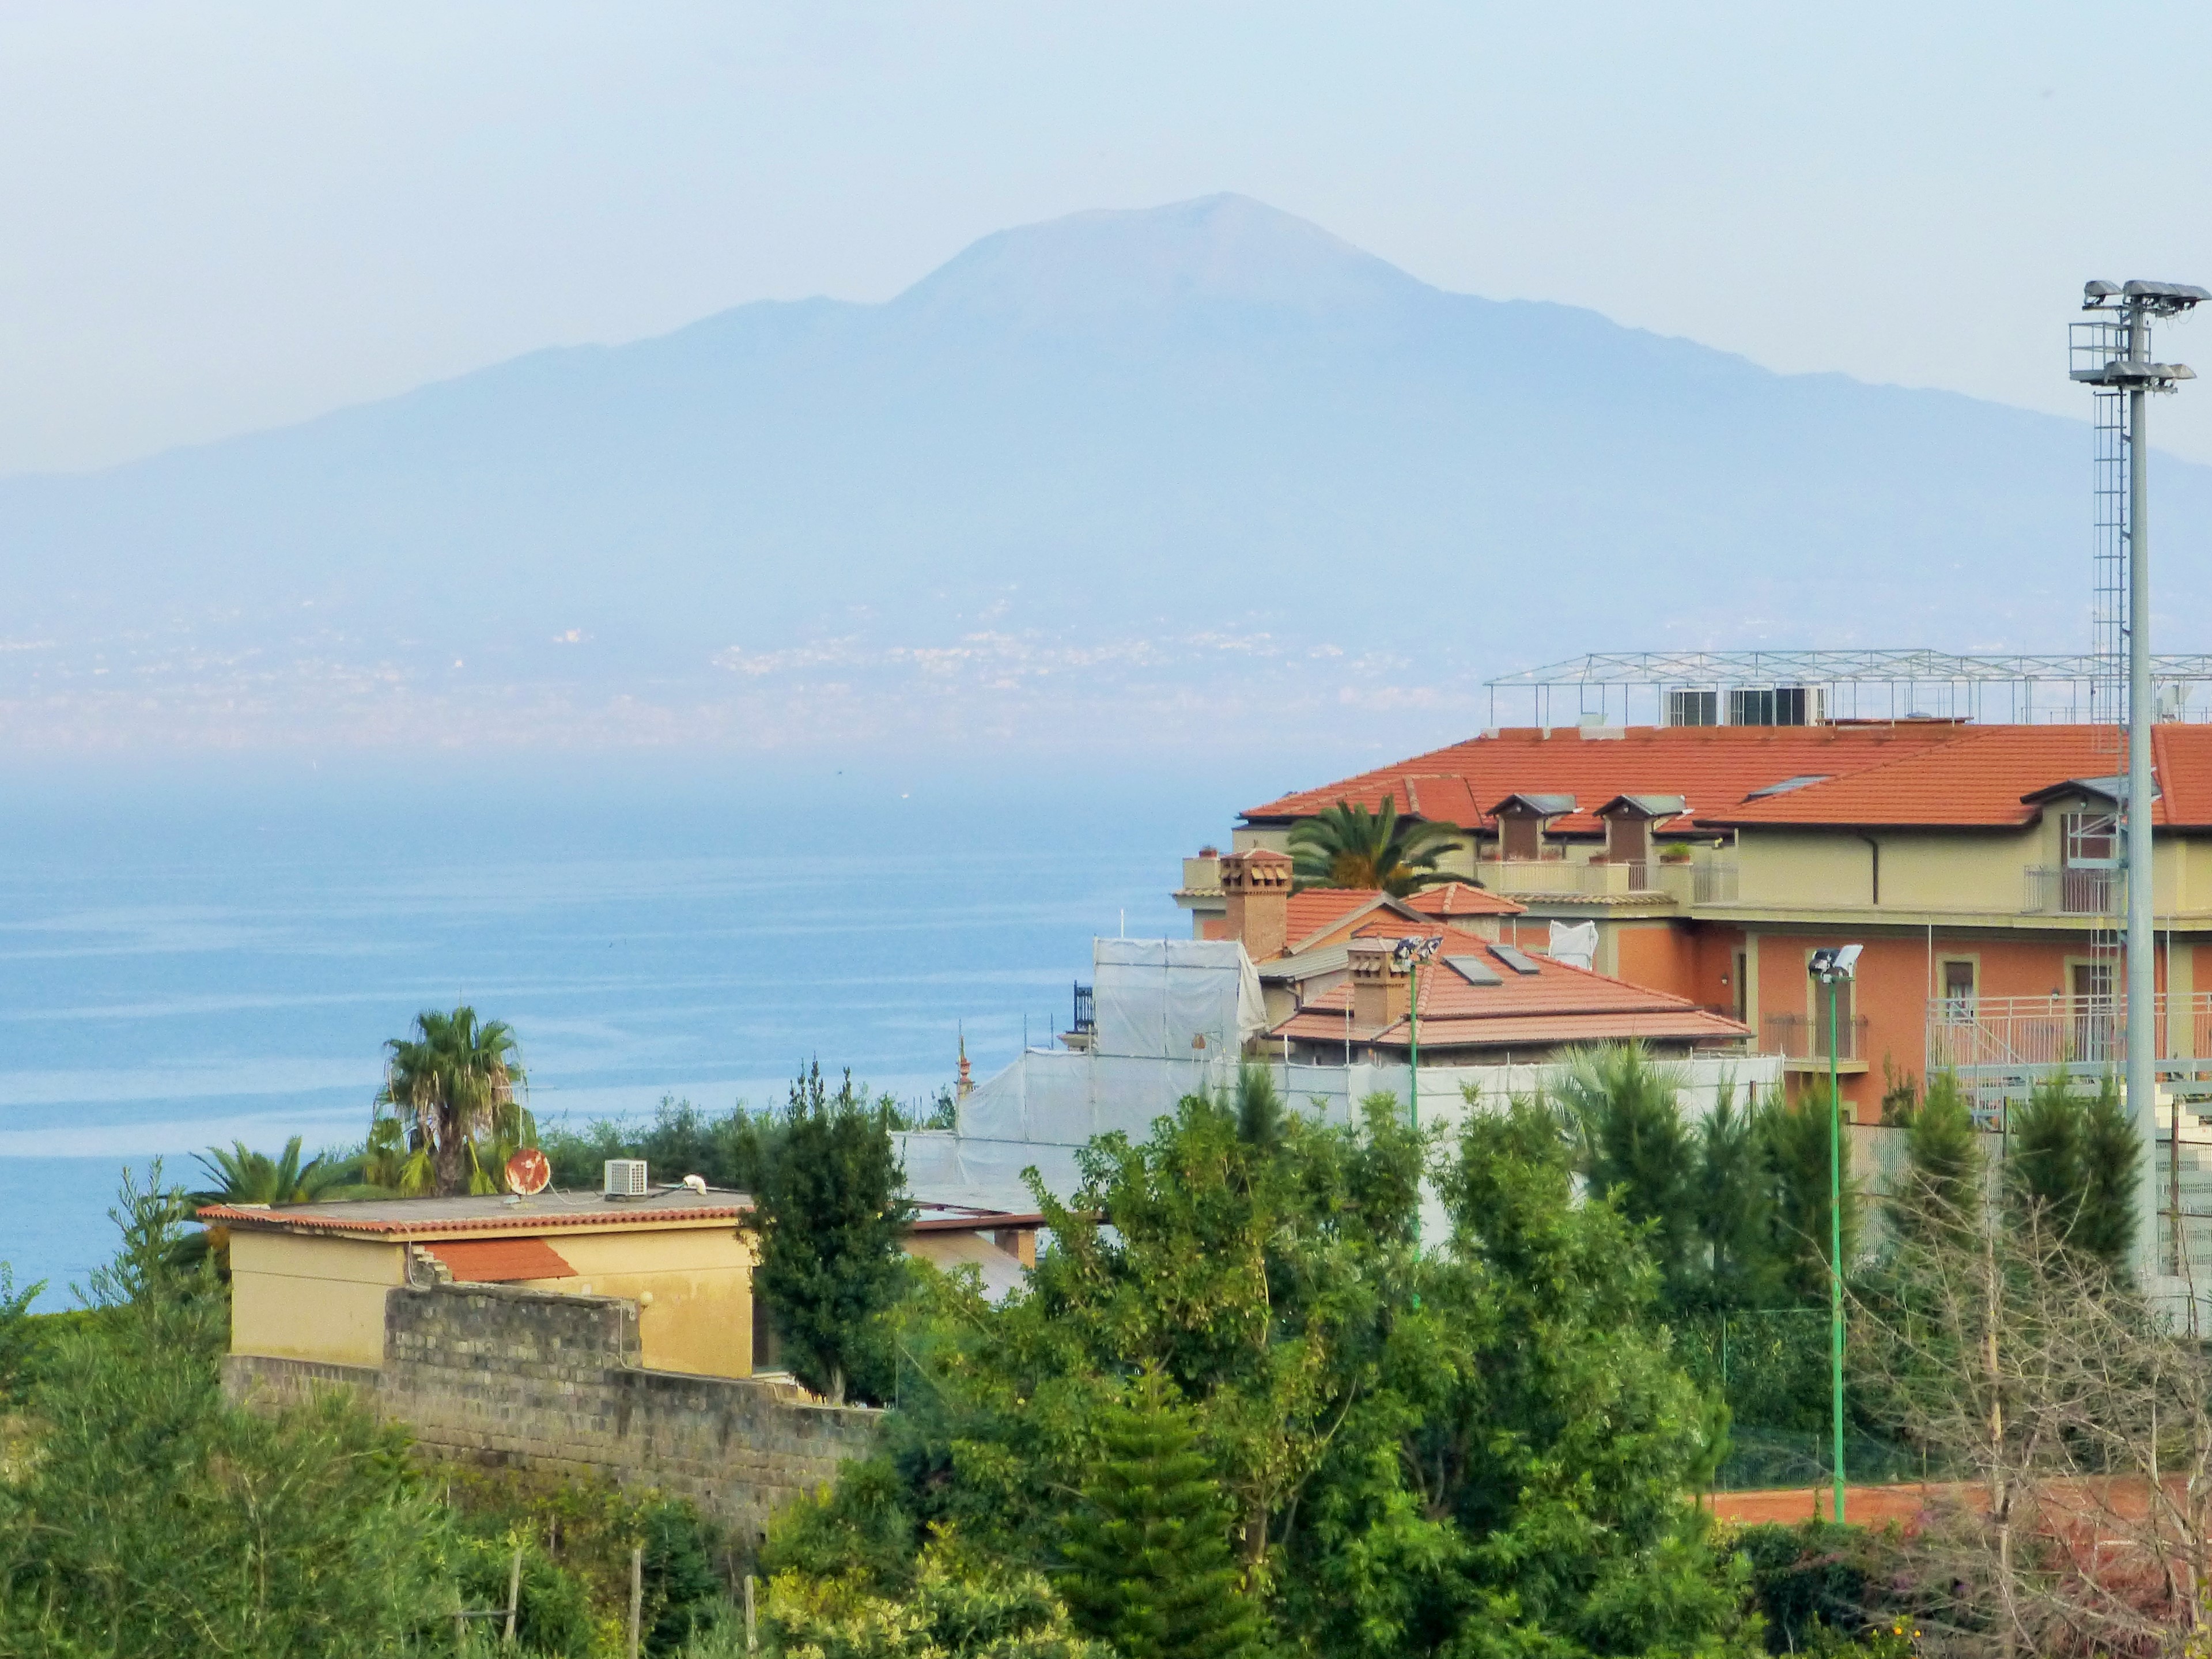 View of the Bay of Naples and Mt. Vesuvius in Sorrento, Italy